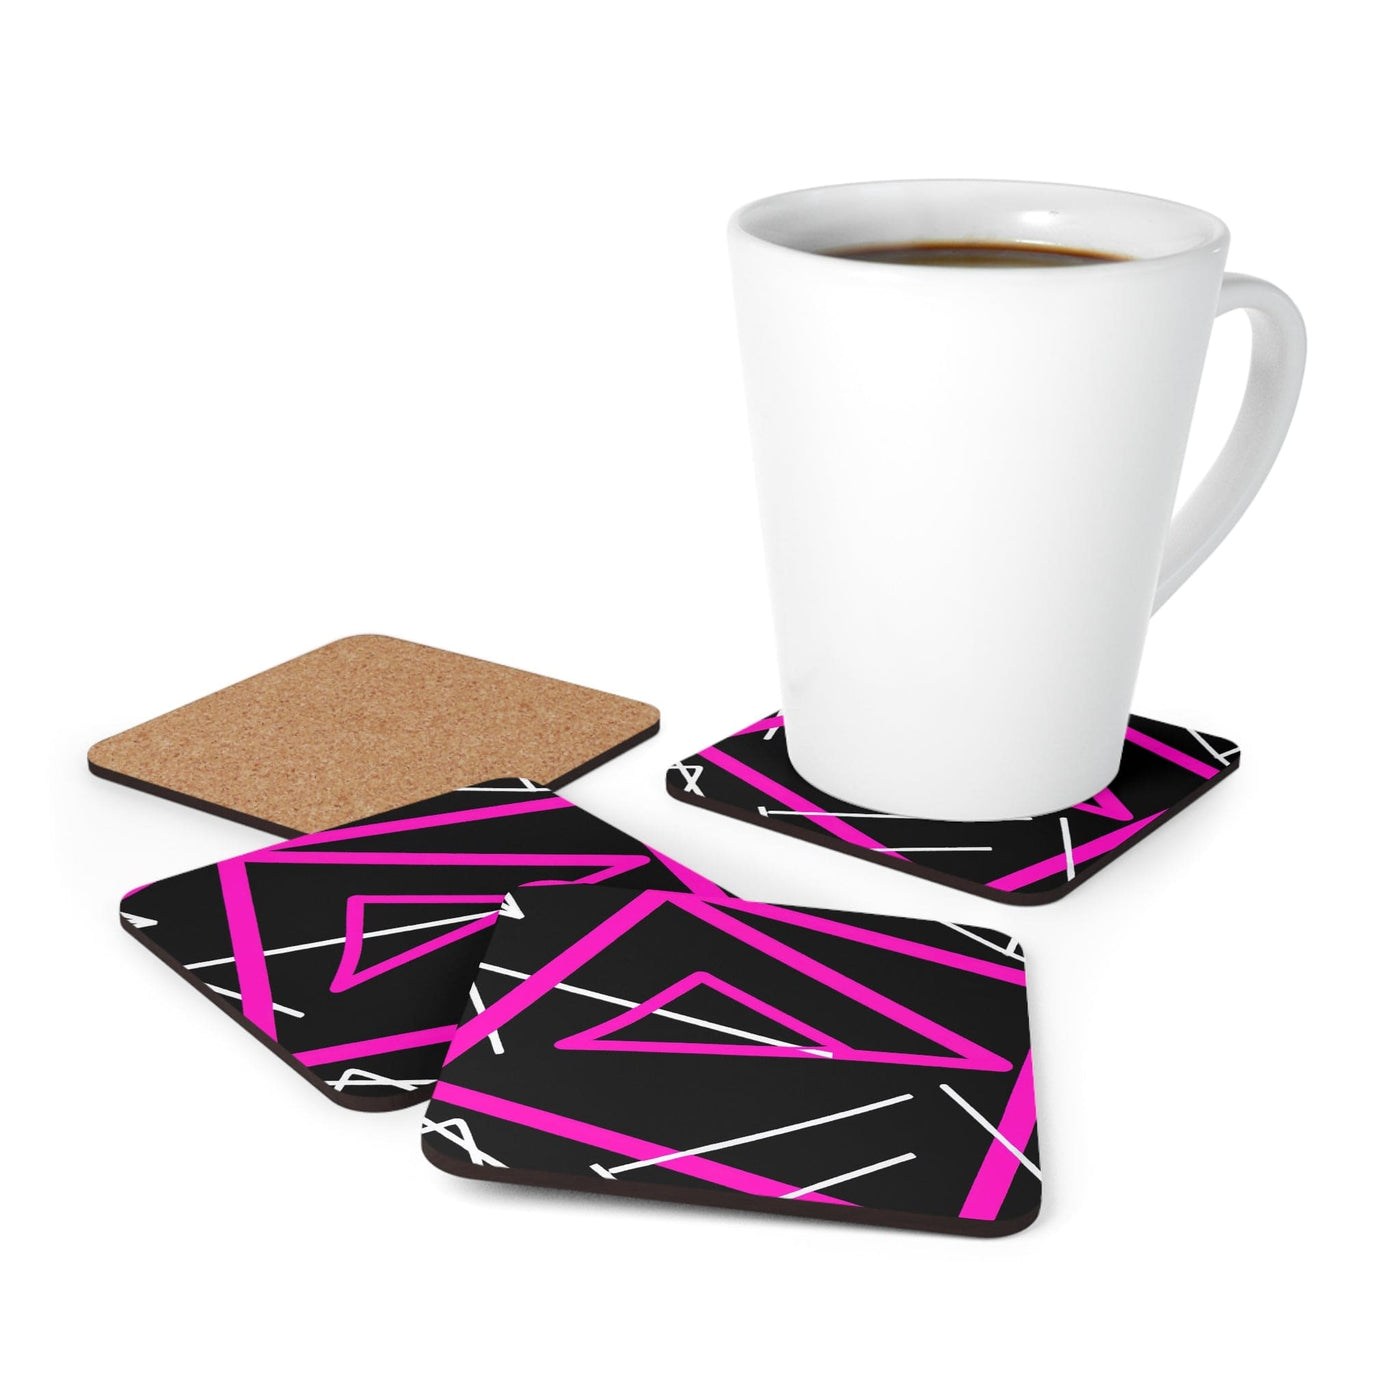 Handcrafted Square Coaster Set Of 4 For Drinks And Cups Black Pink Pattern